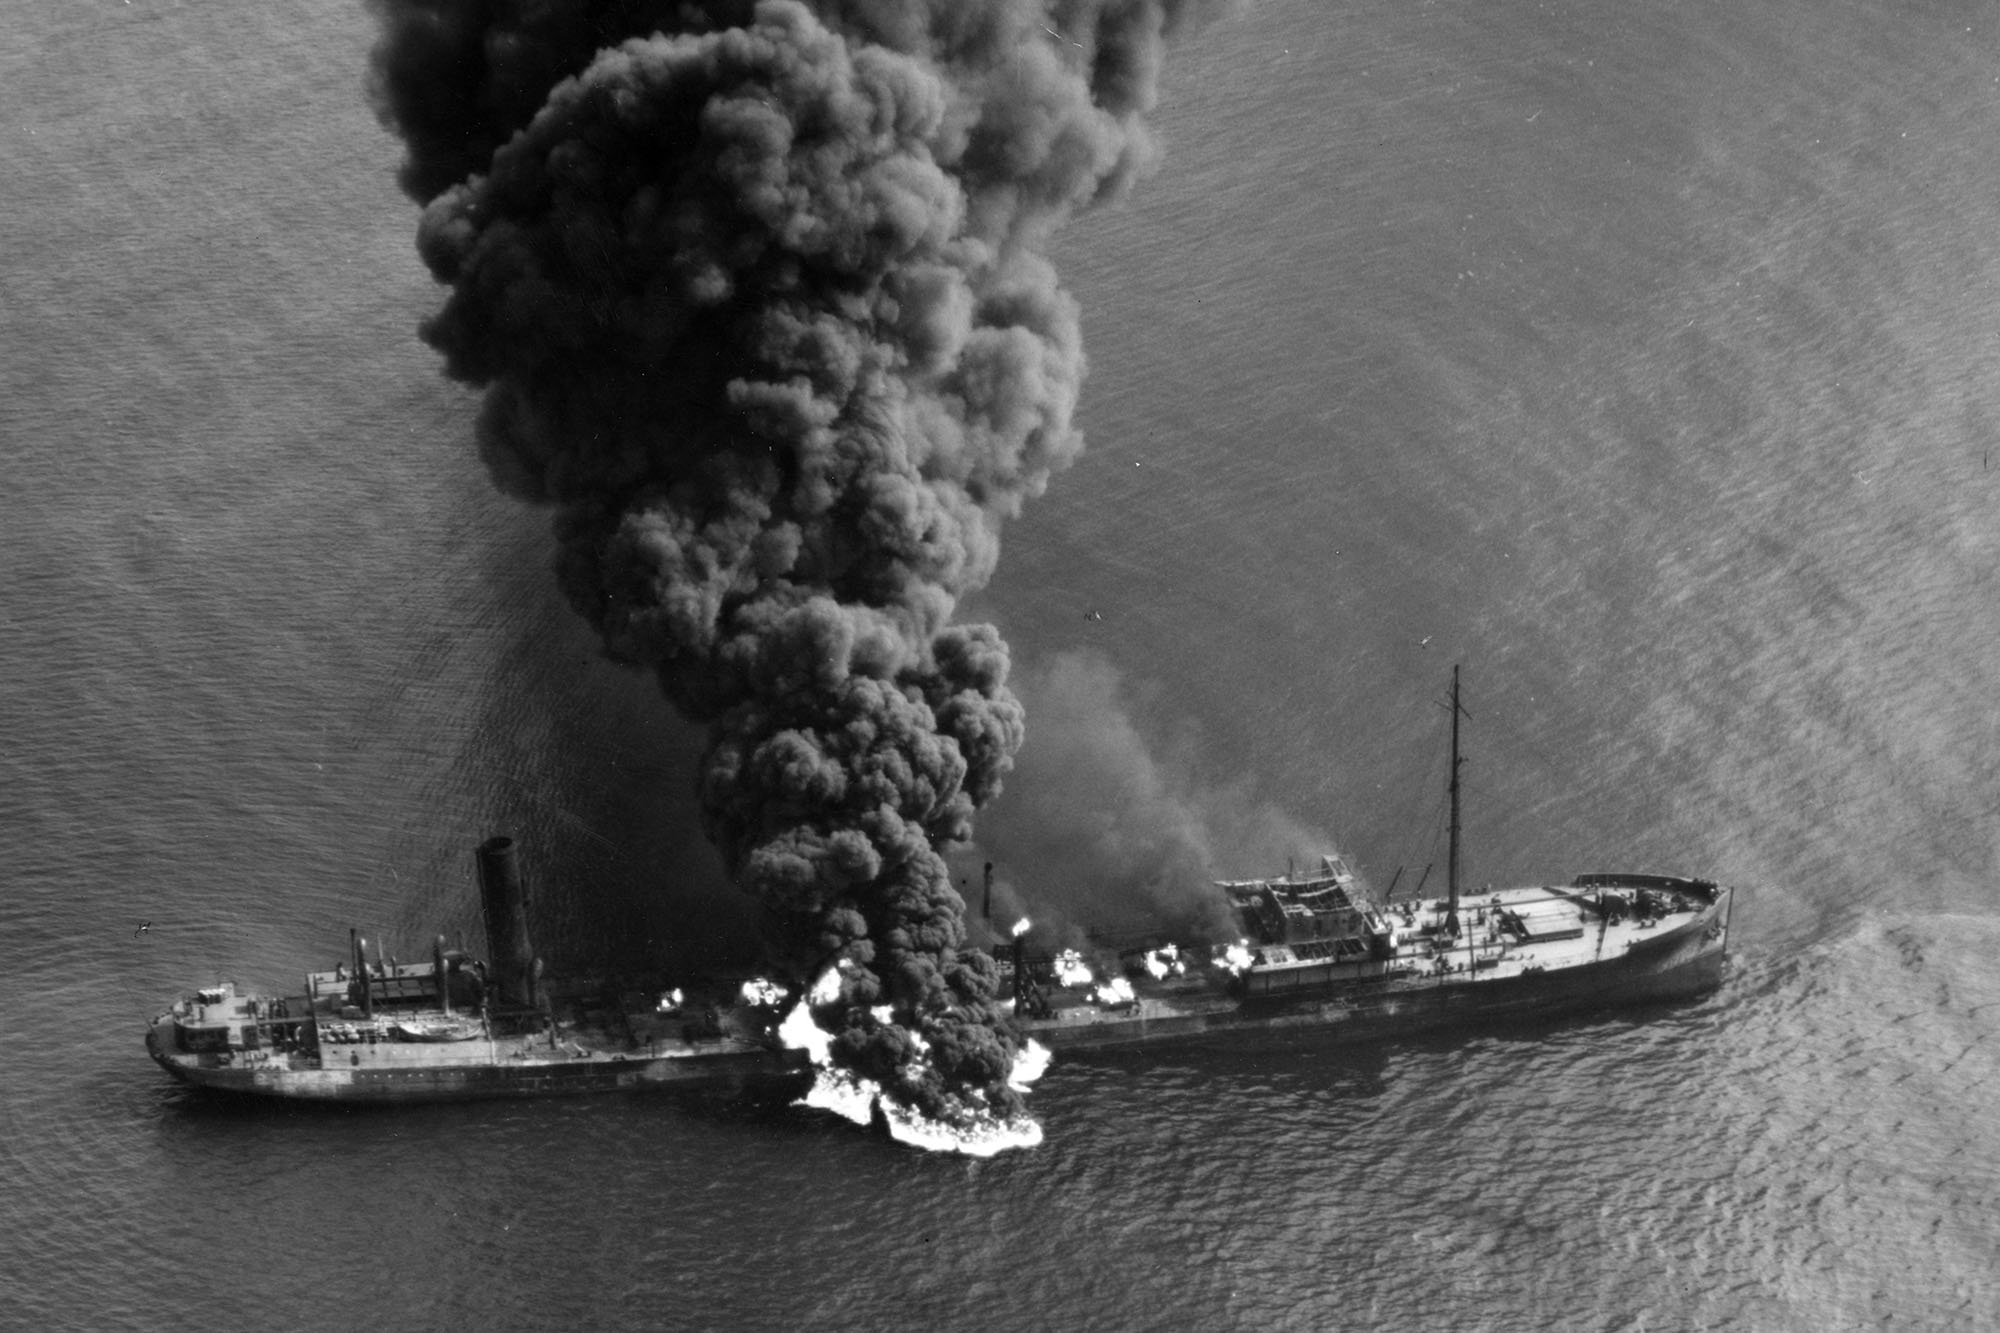  tanker Byron D. Benson smoke coming up from it after being struck by a torpedoe